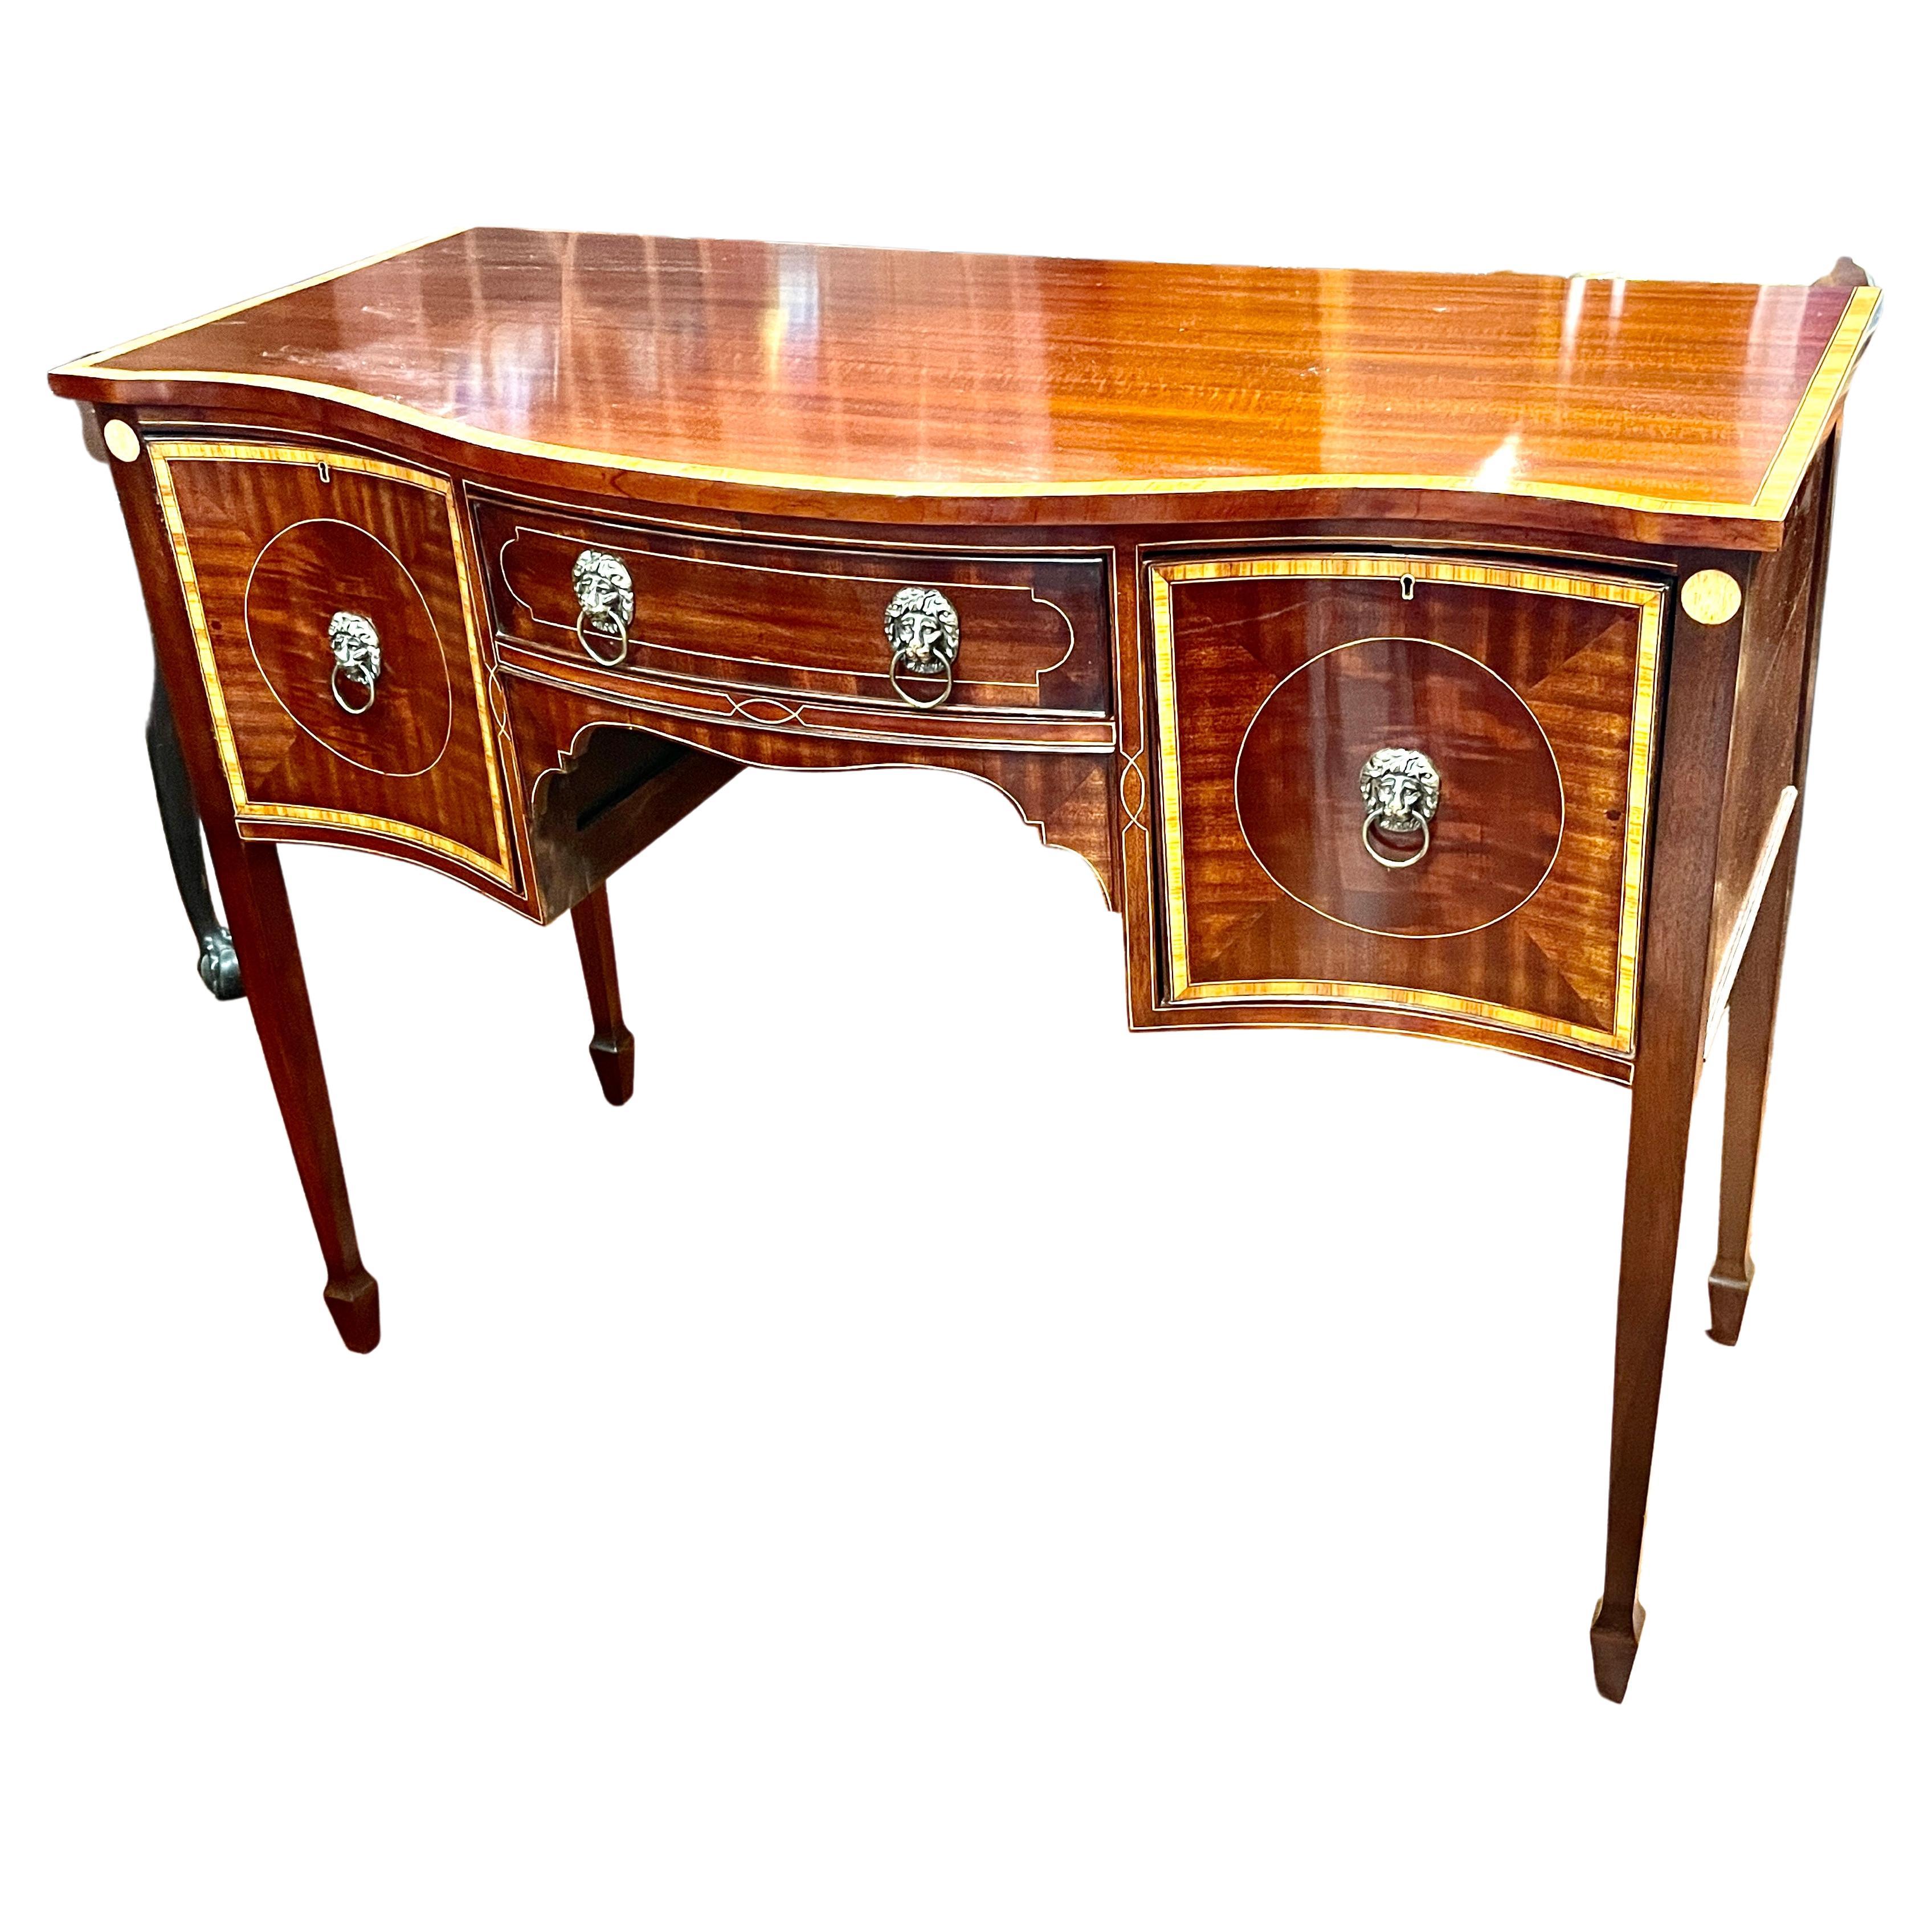 Gorgeous antique English inlaid mahogany Hepplewhite style serpentine sideboard with tulipwood cross-banding and handsome Regency style cast brass lion's head pulls. Cellarette drawer on right side and cupboard on left. Extraordinary tulipwood